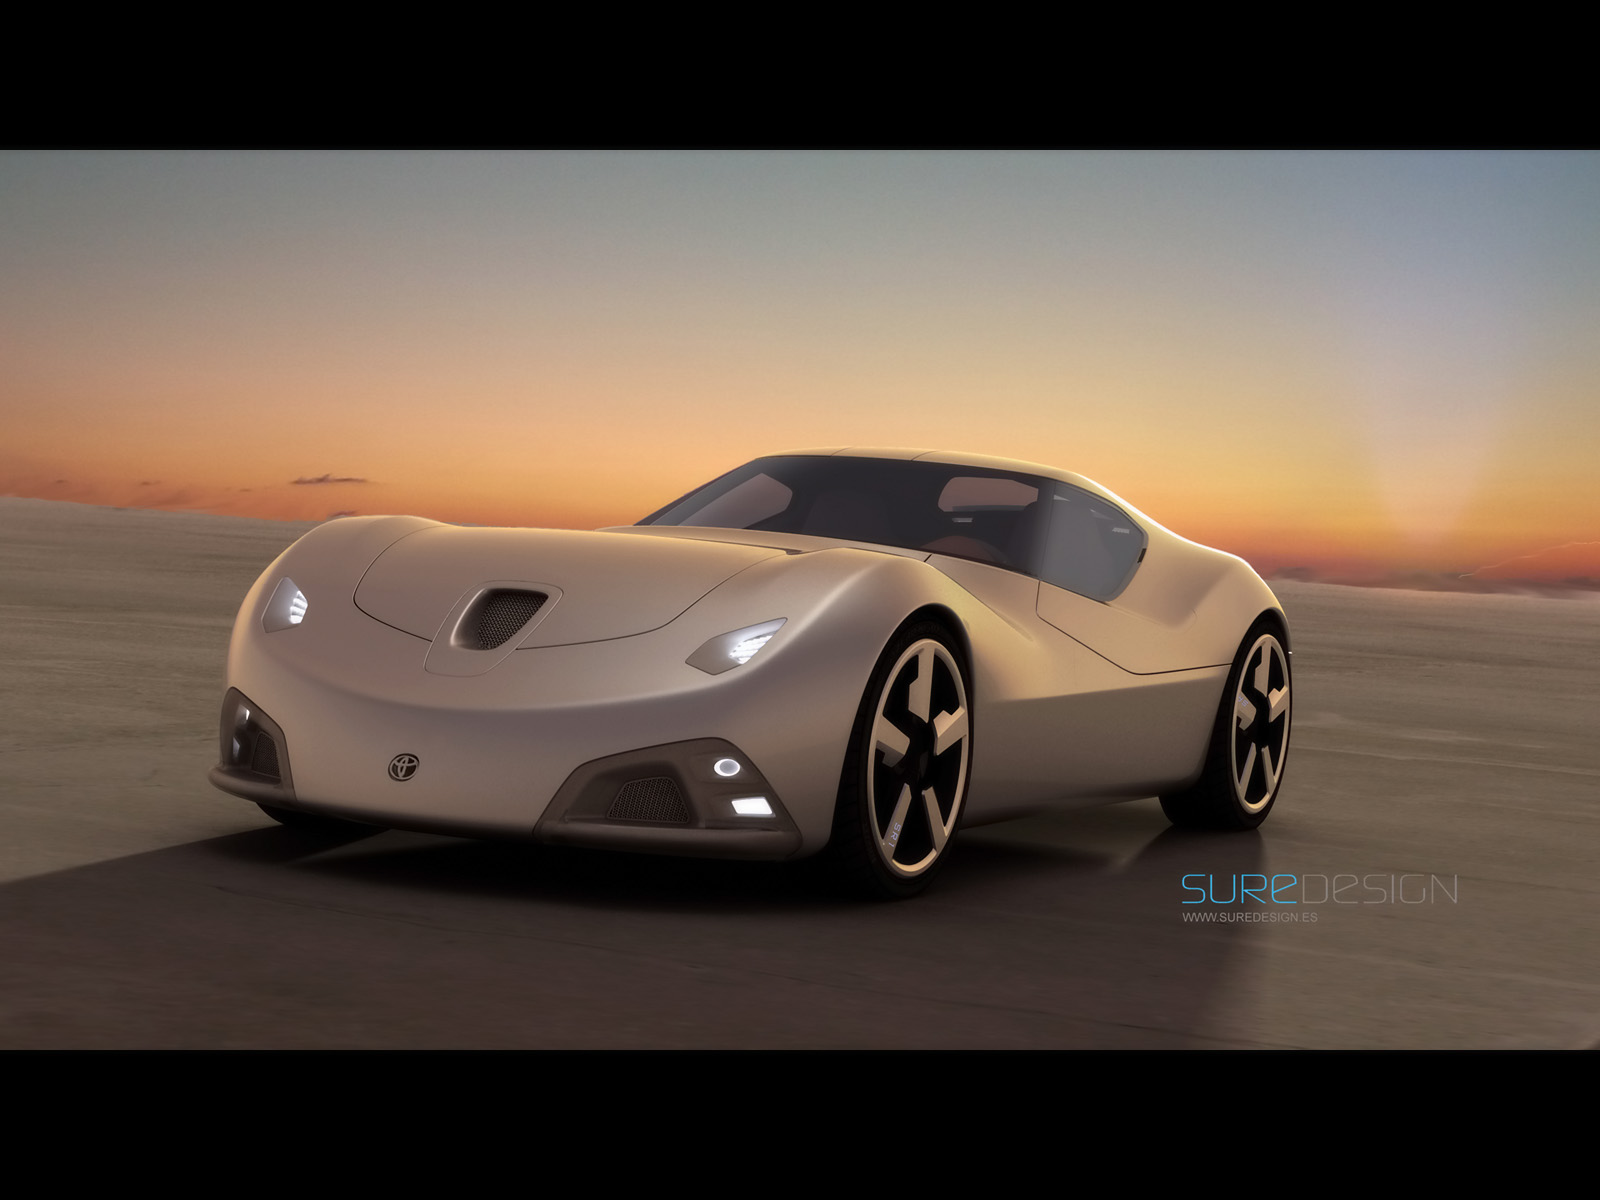 Top 20 Best Toyota Cars Wallpapers Gallery. - Original Preview